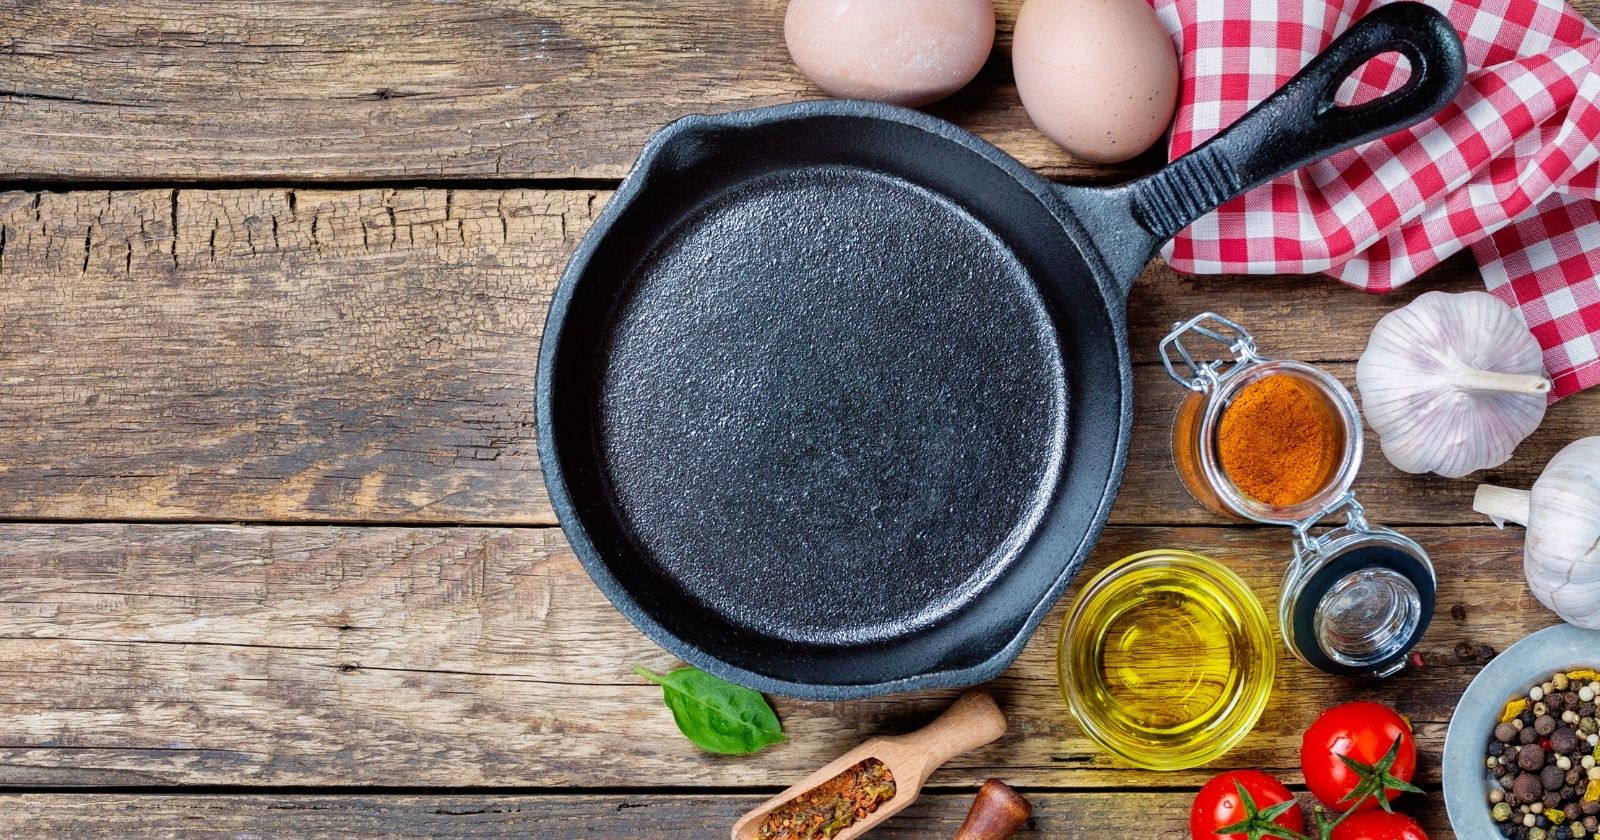 Cast Iron, Iron, Stainless Steel: Which Kitchen Utensils Should You Choose Based On Your Use?